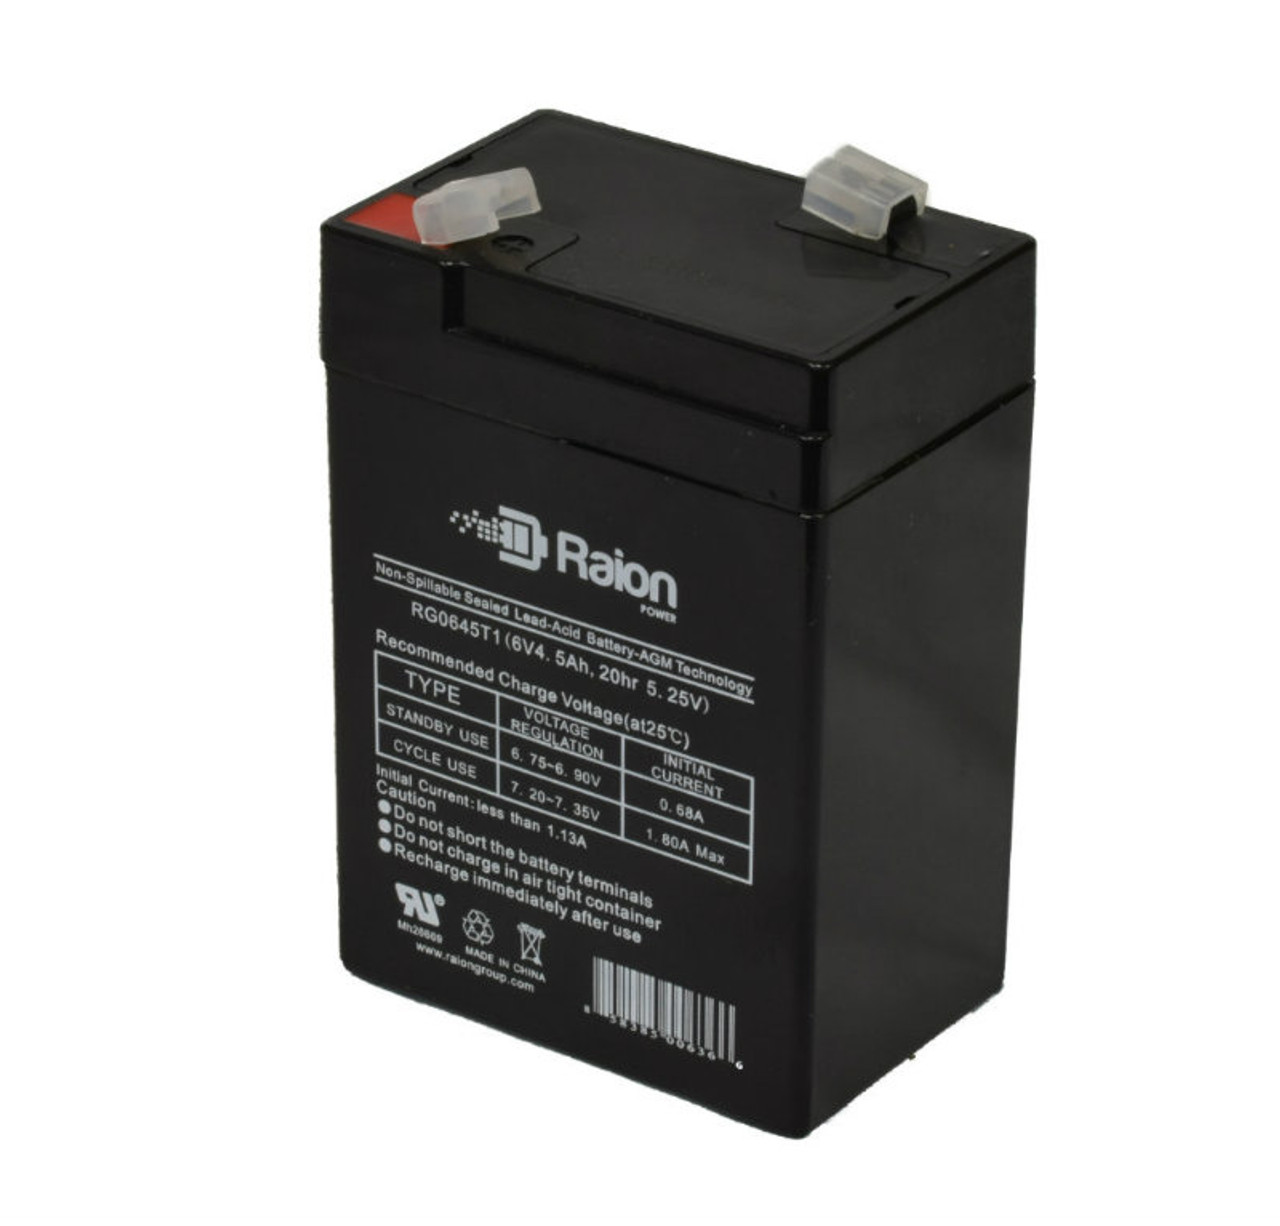 Raion Power RG0645T1 6V 4.5Ah Replacement Battery Cartridge for Weida HX6-4.5H